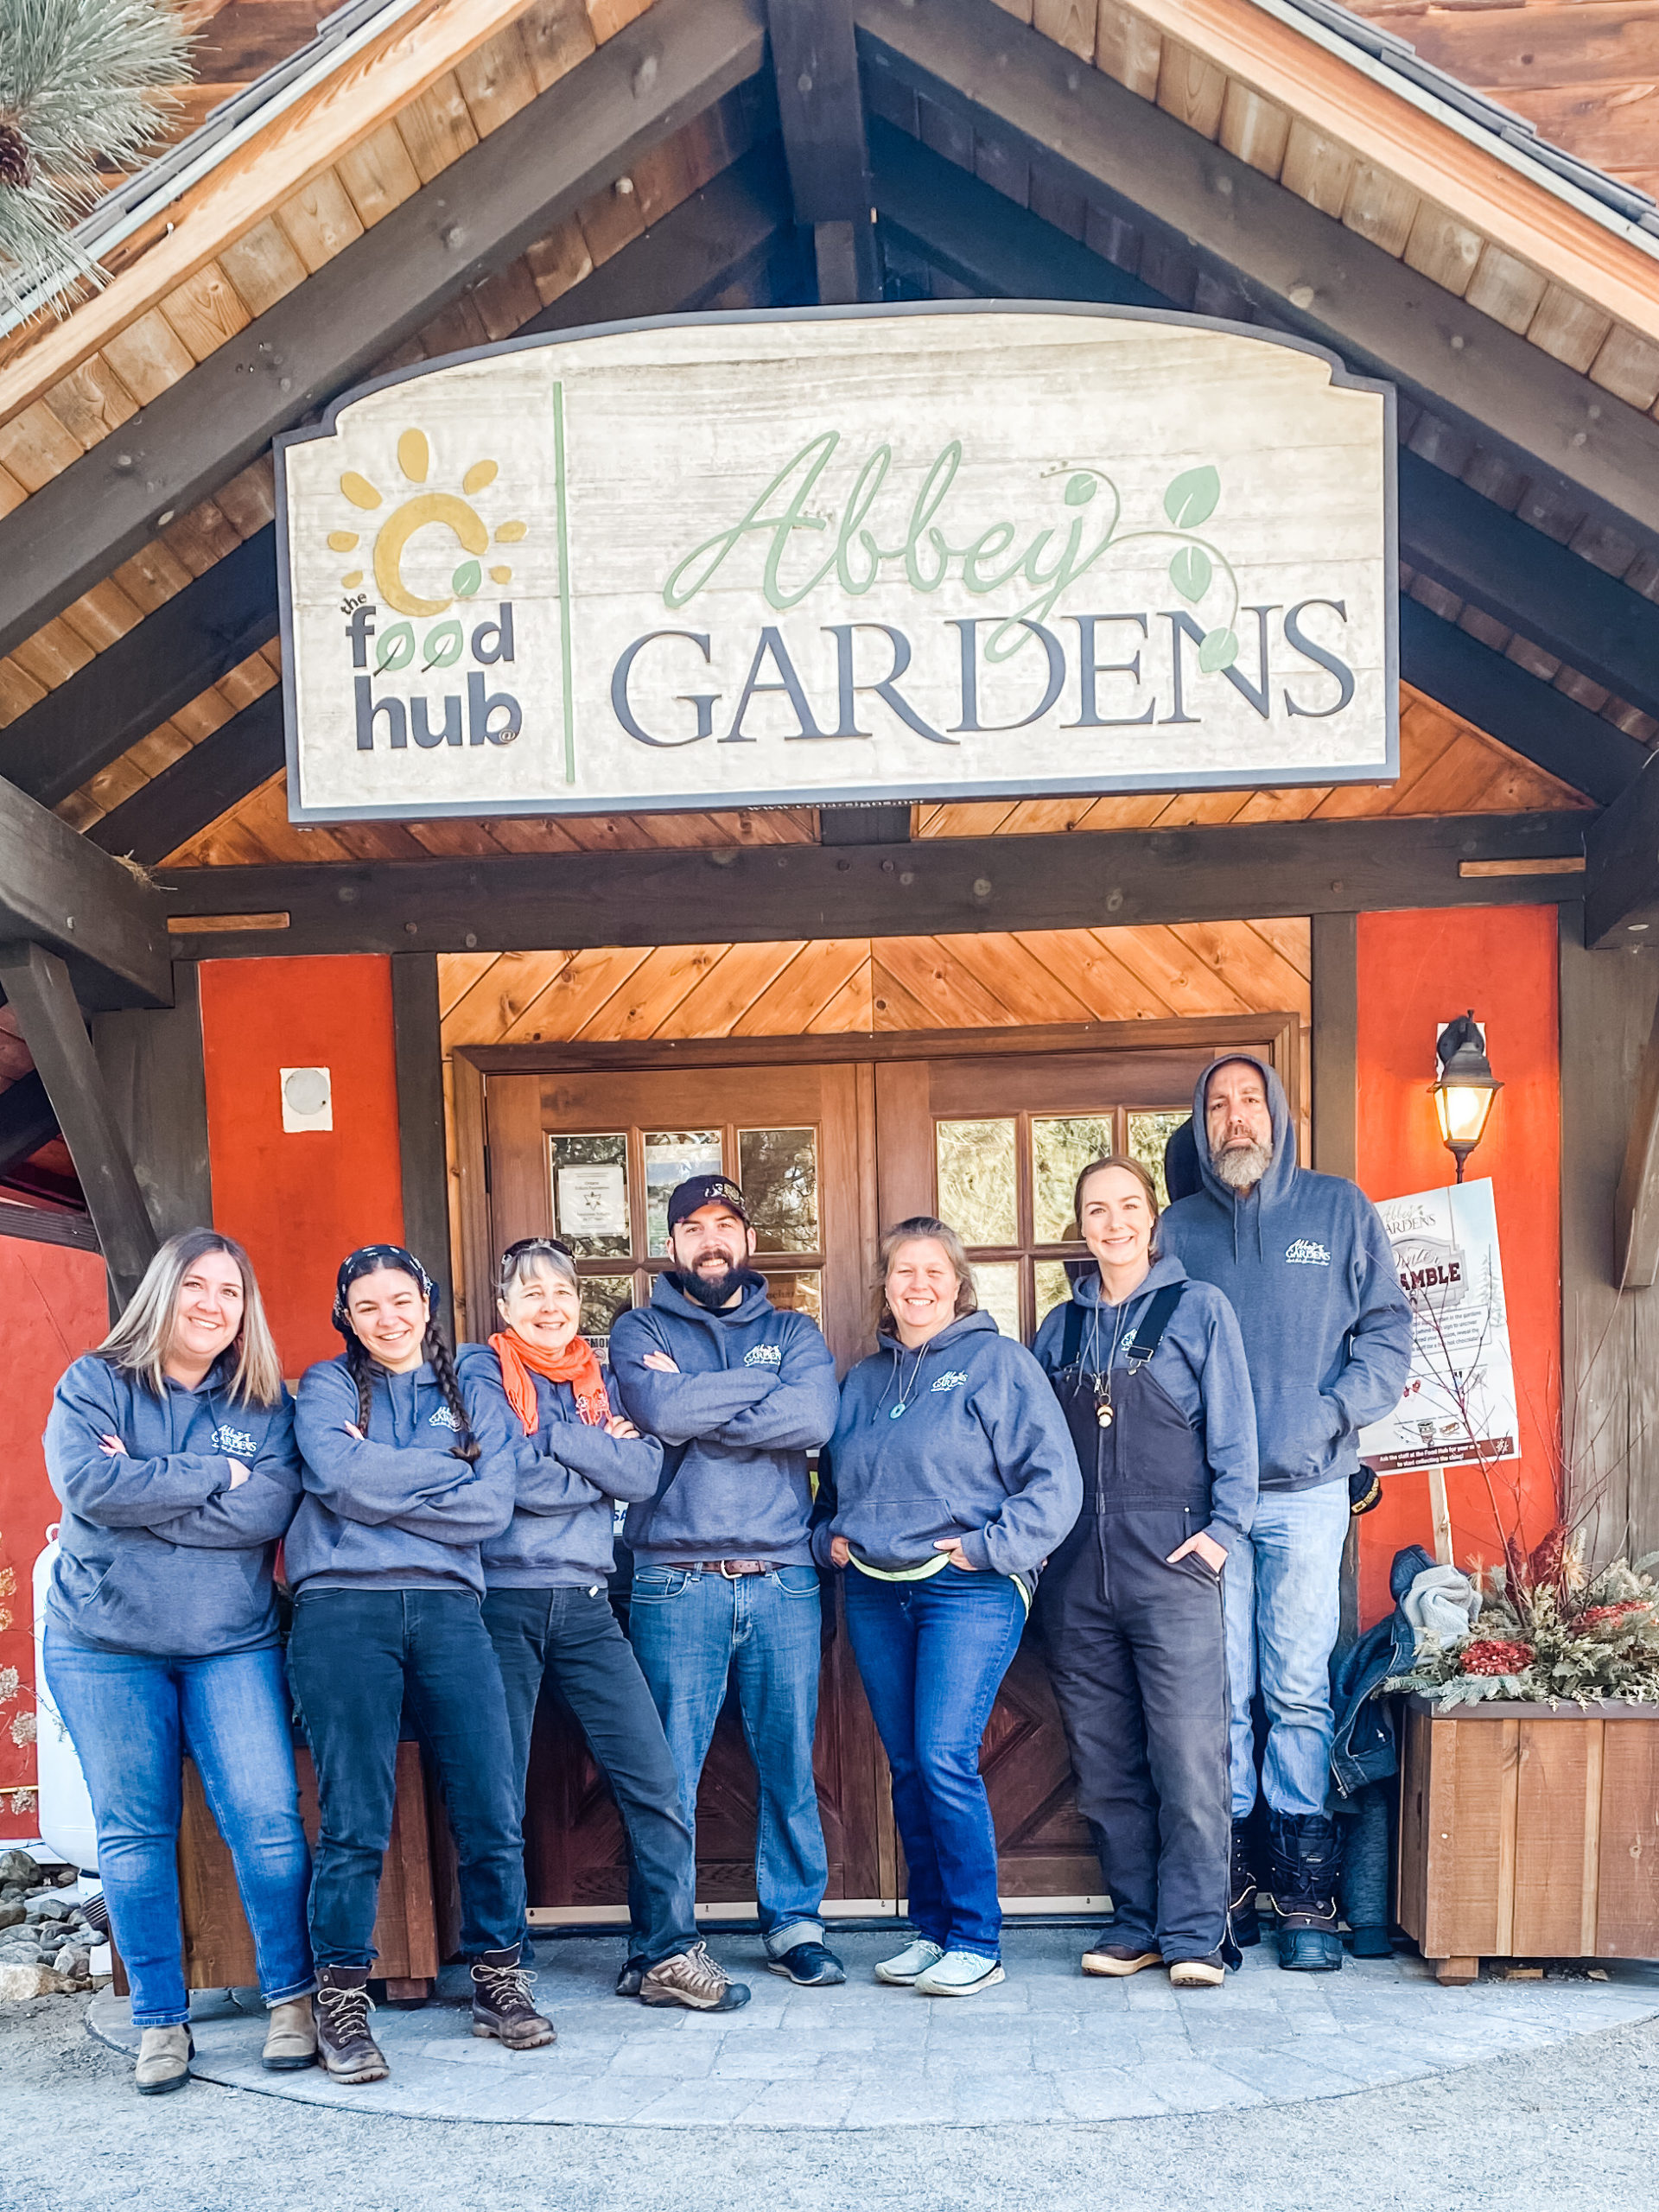 abbey gardens' team standing in front of their sign